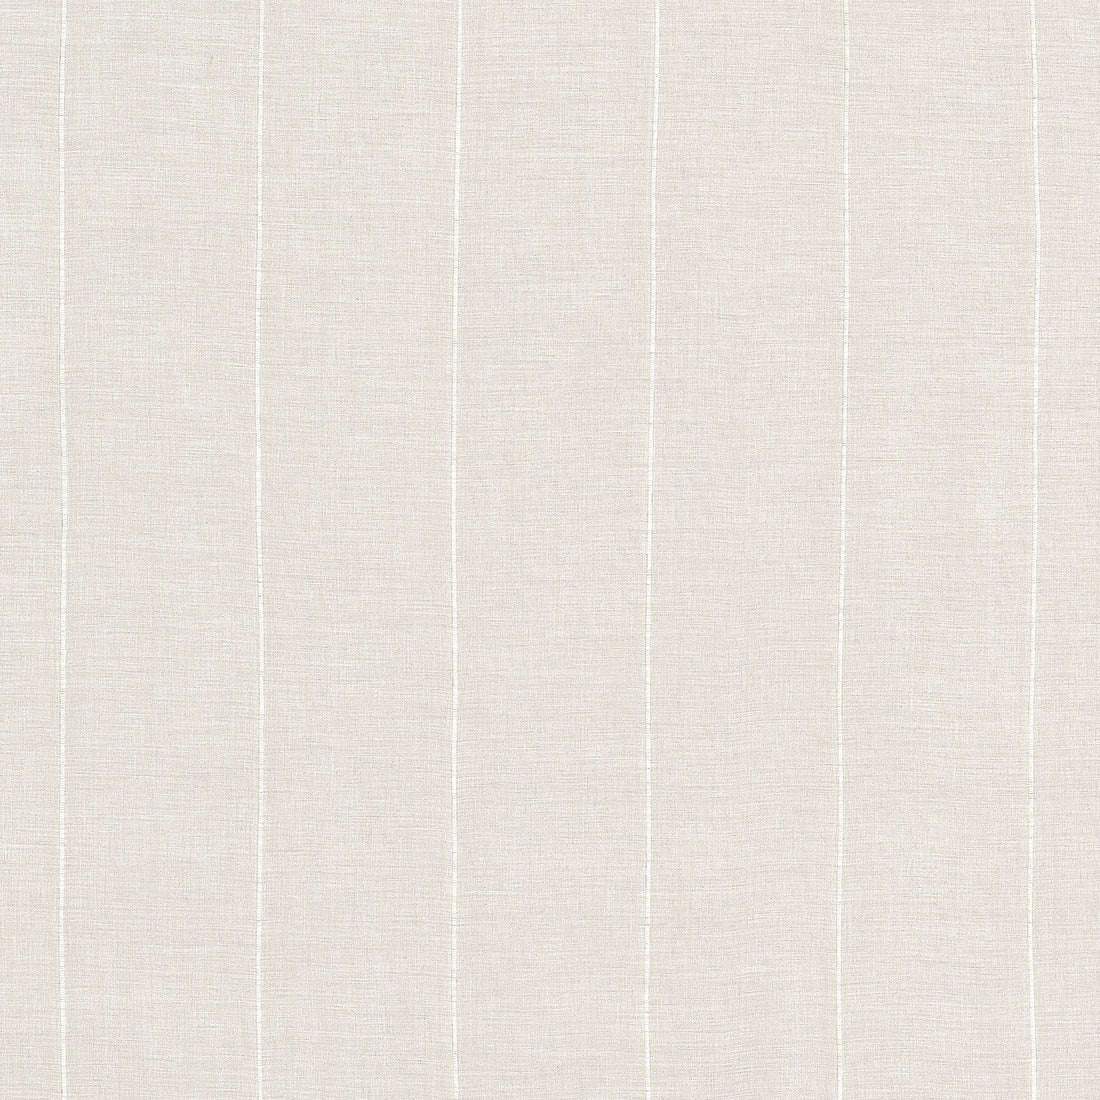 Crestline fabric in flax color - pattern number FWW81738 - by Thibaut in the Locale Wide Width collection